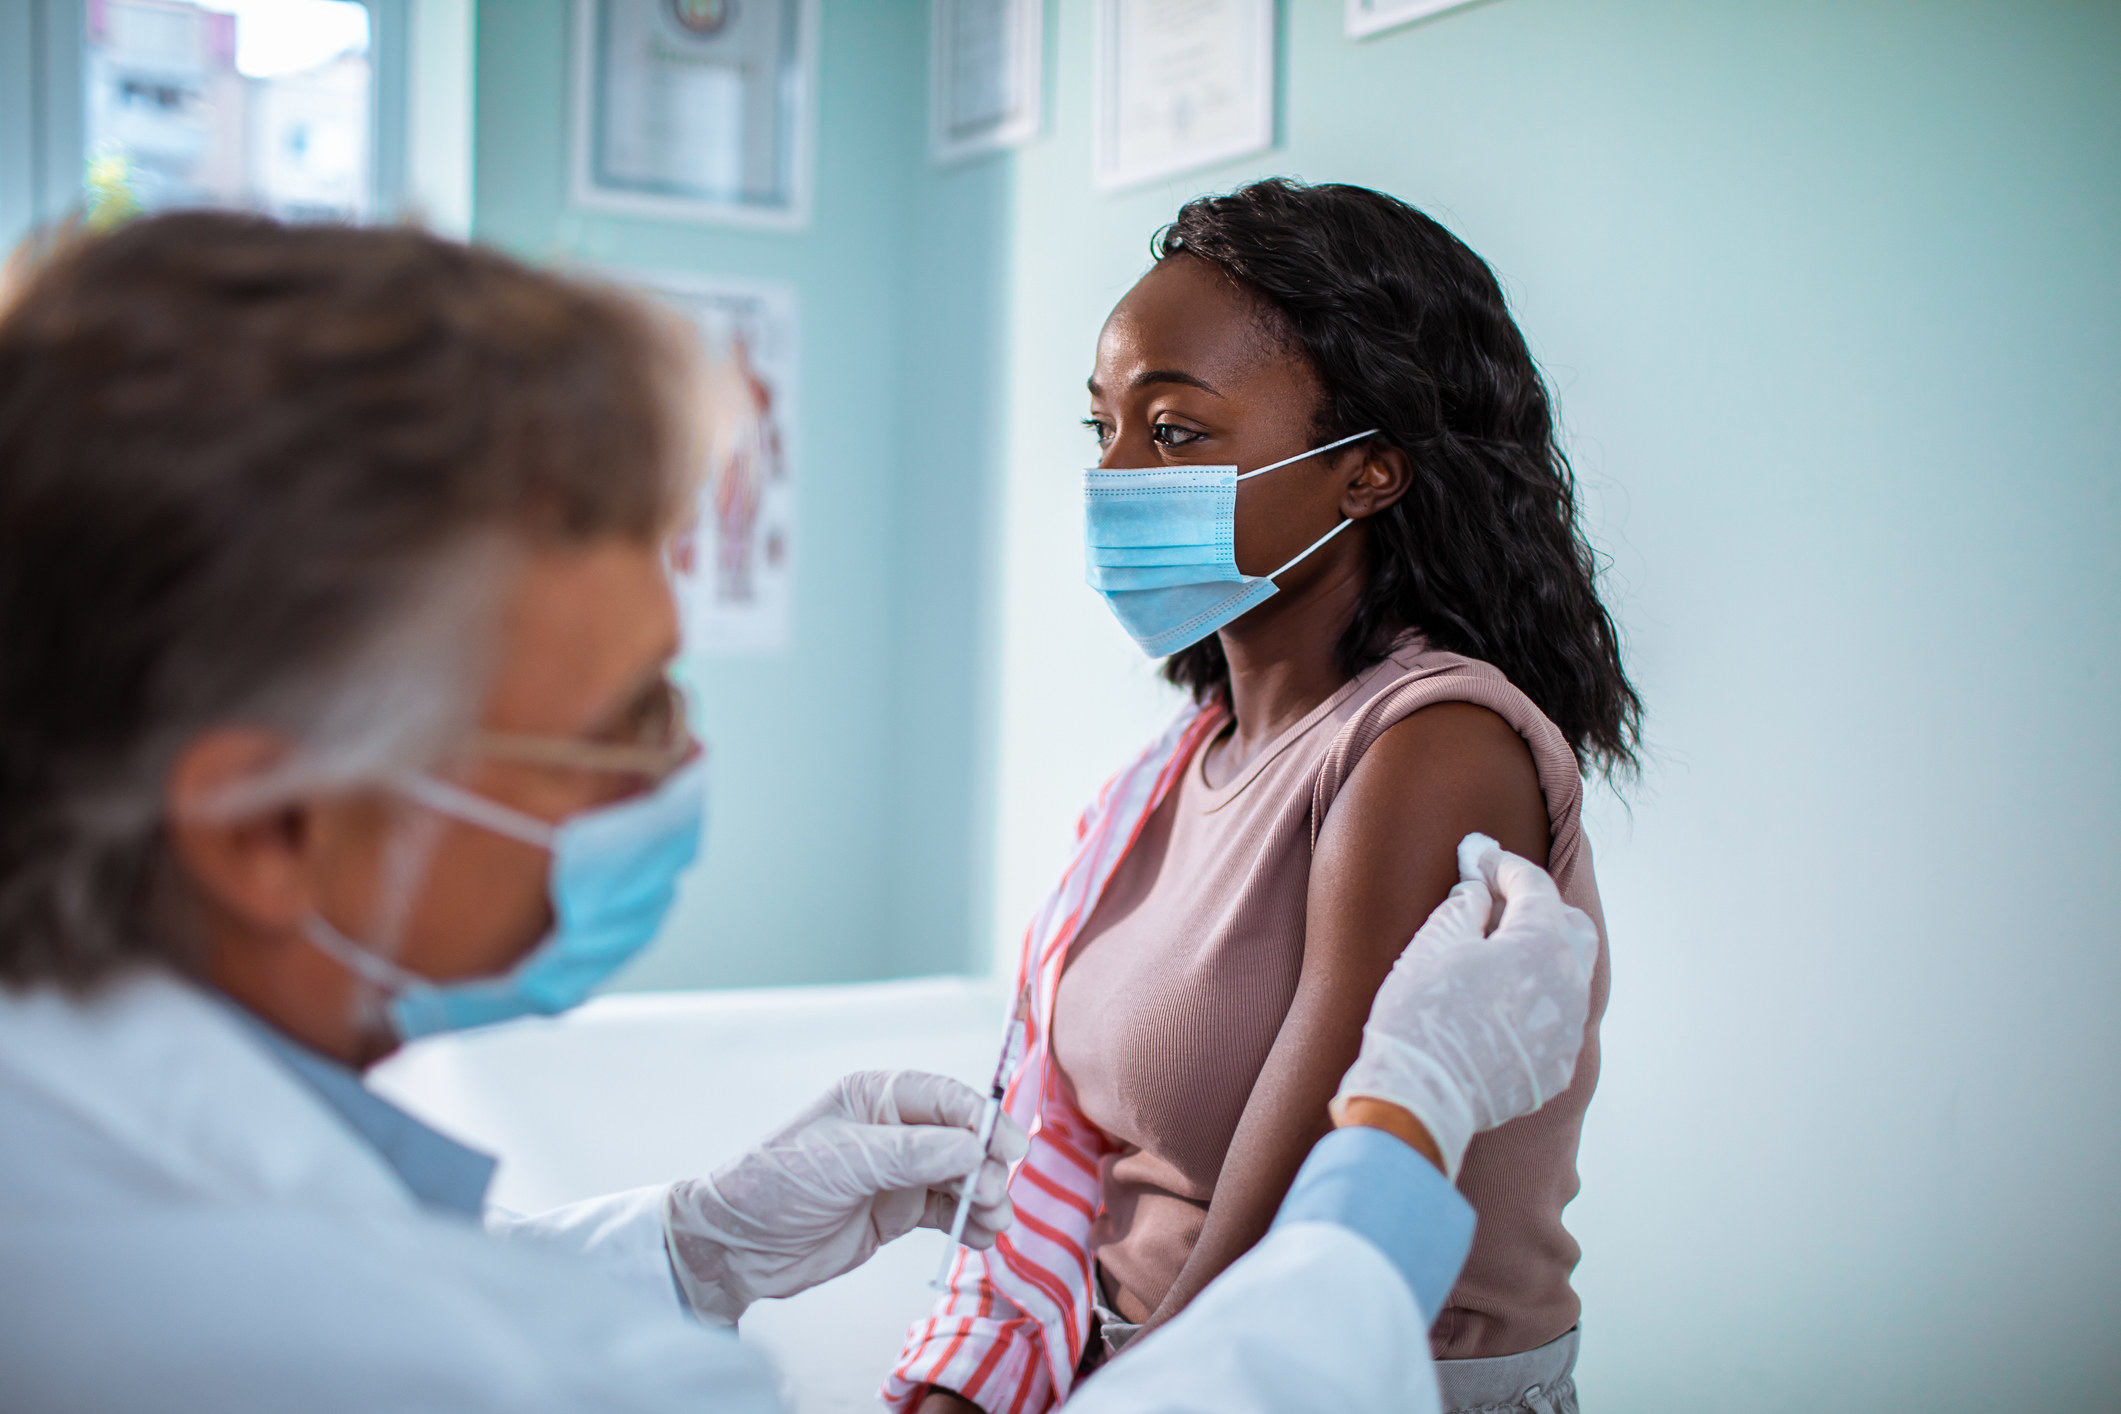 A woman receives a vaccination in a medical setting. She is wearing a mask.